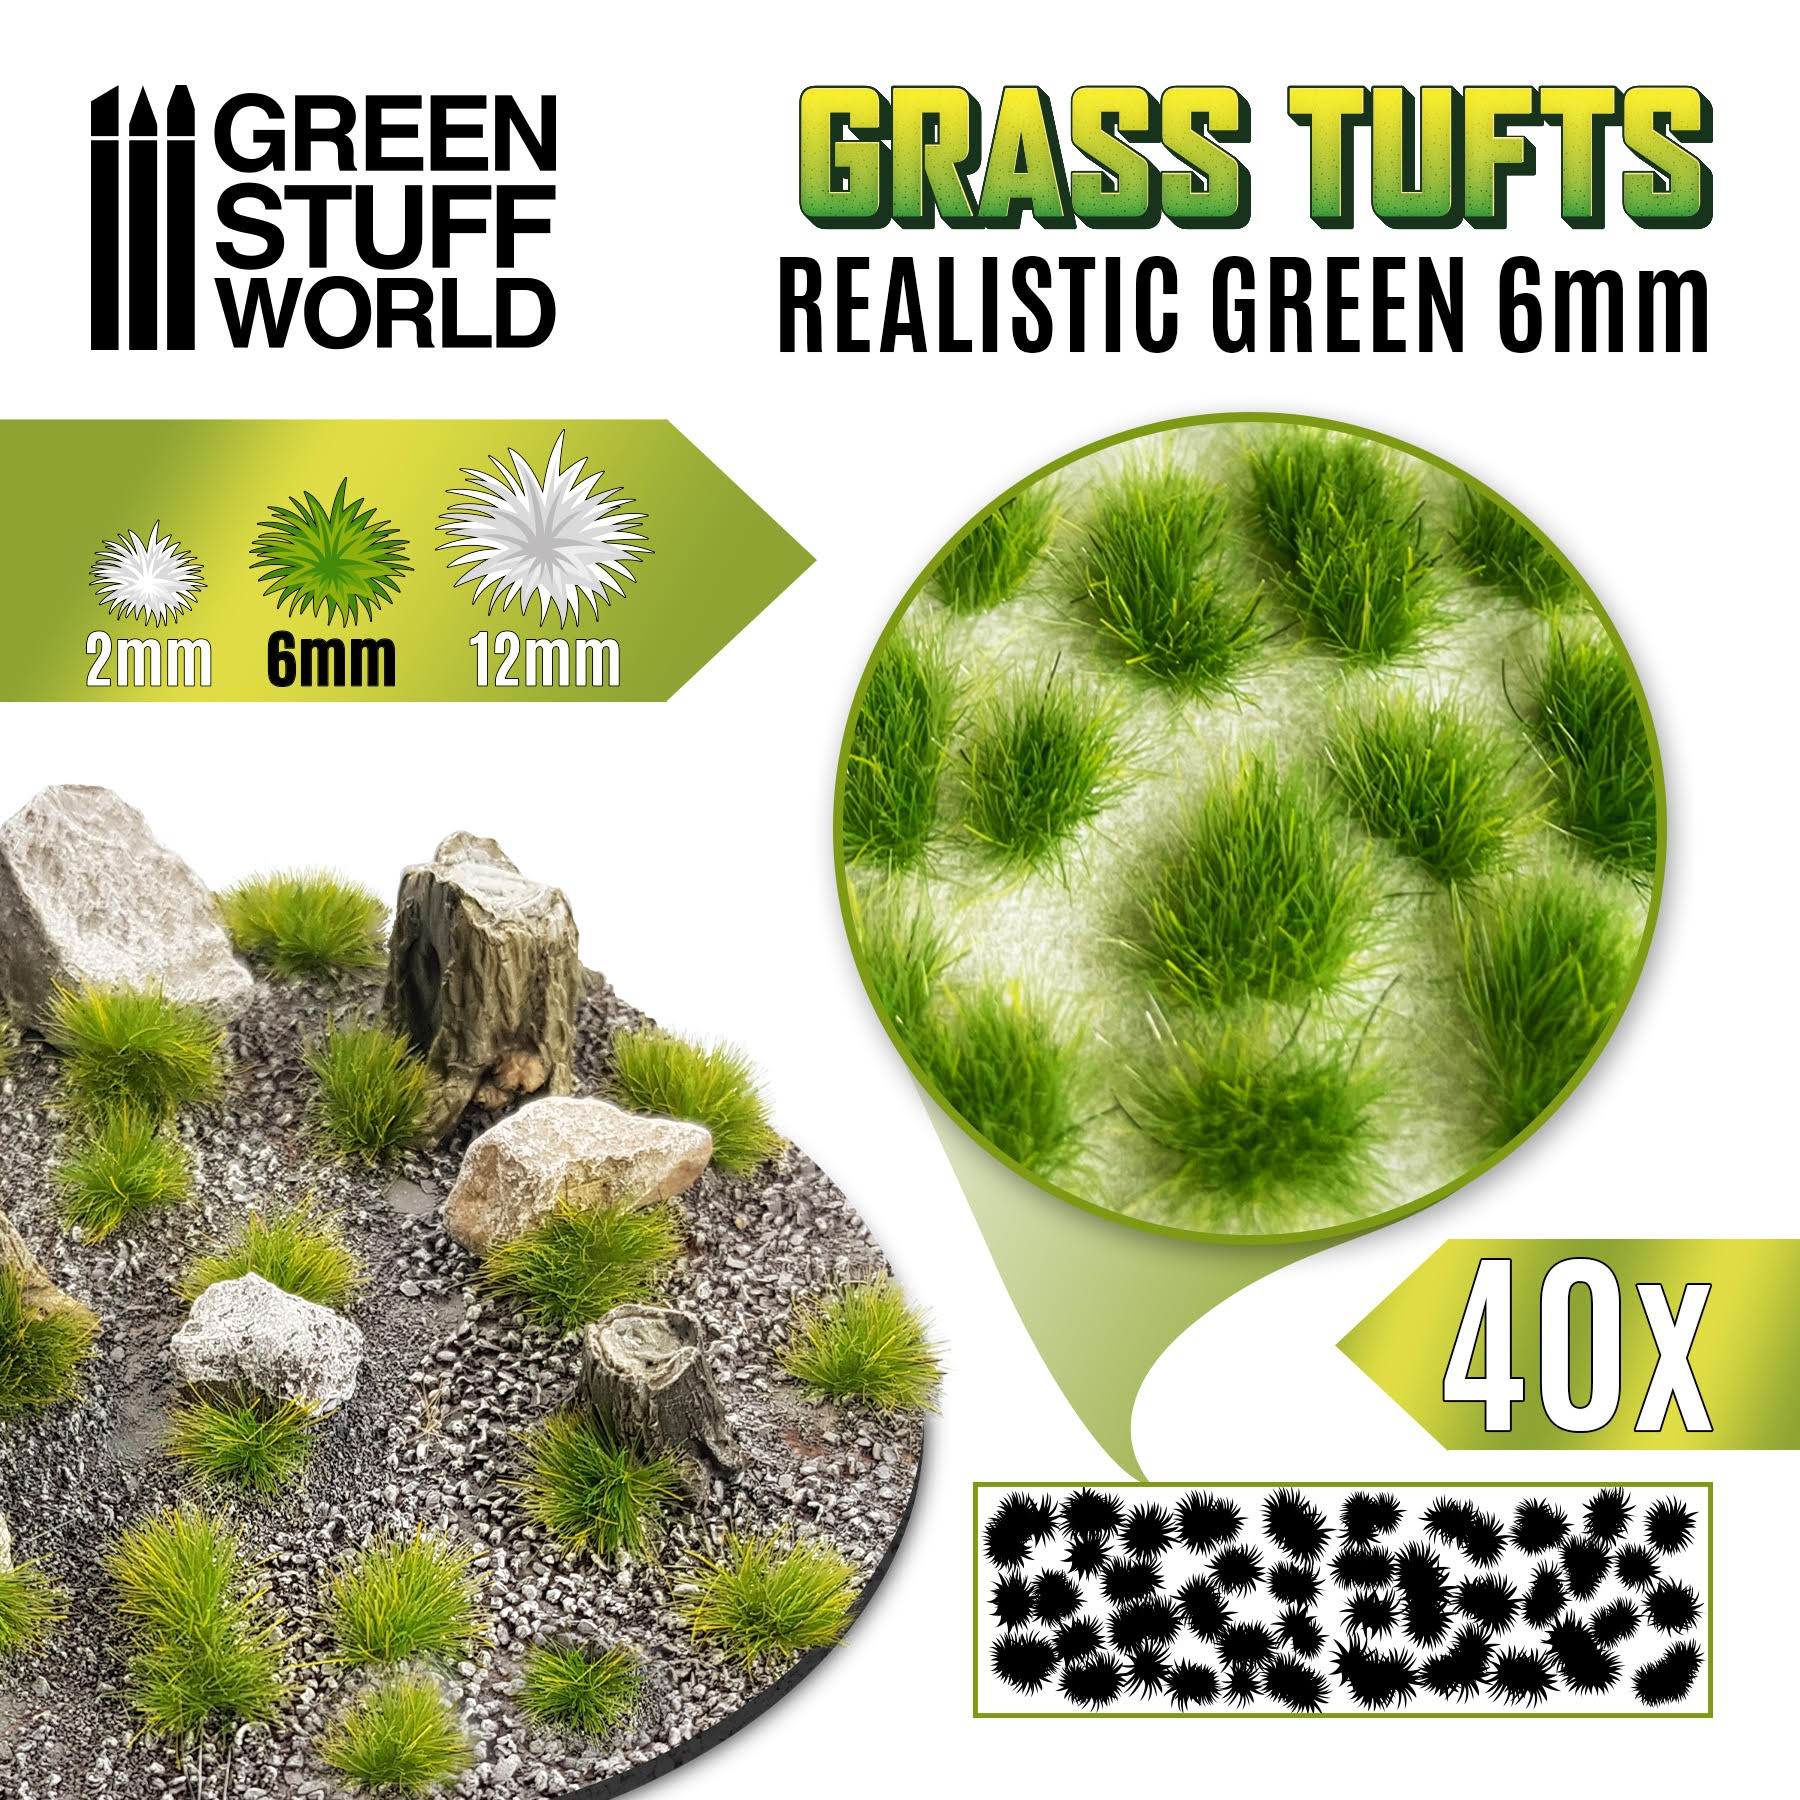 GREEN GRASS 117 PREMIUM Self-Adhesive 6mm Grass Tufts UK-Made Ships FAST from US 